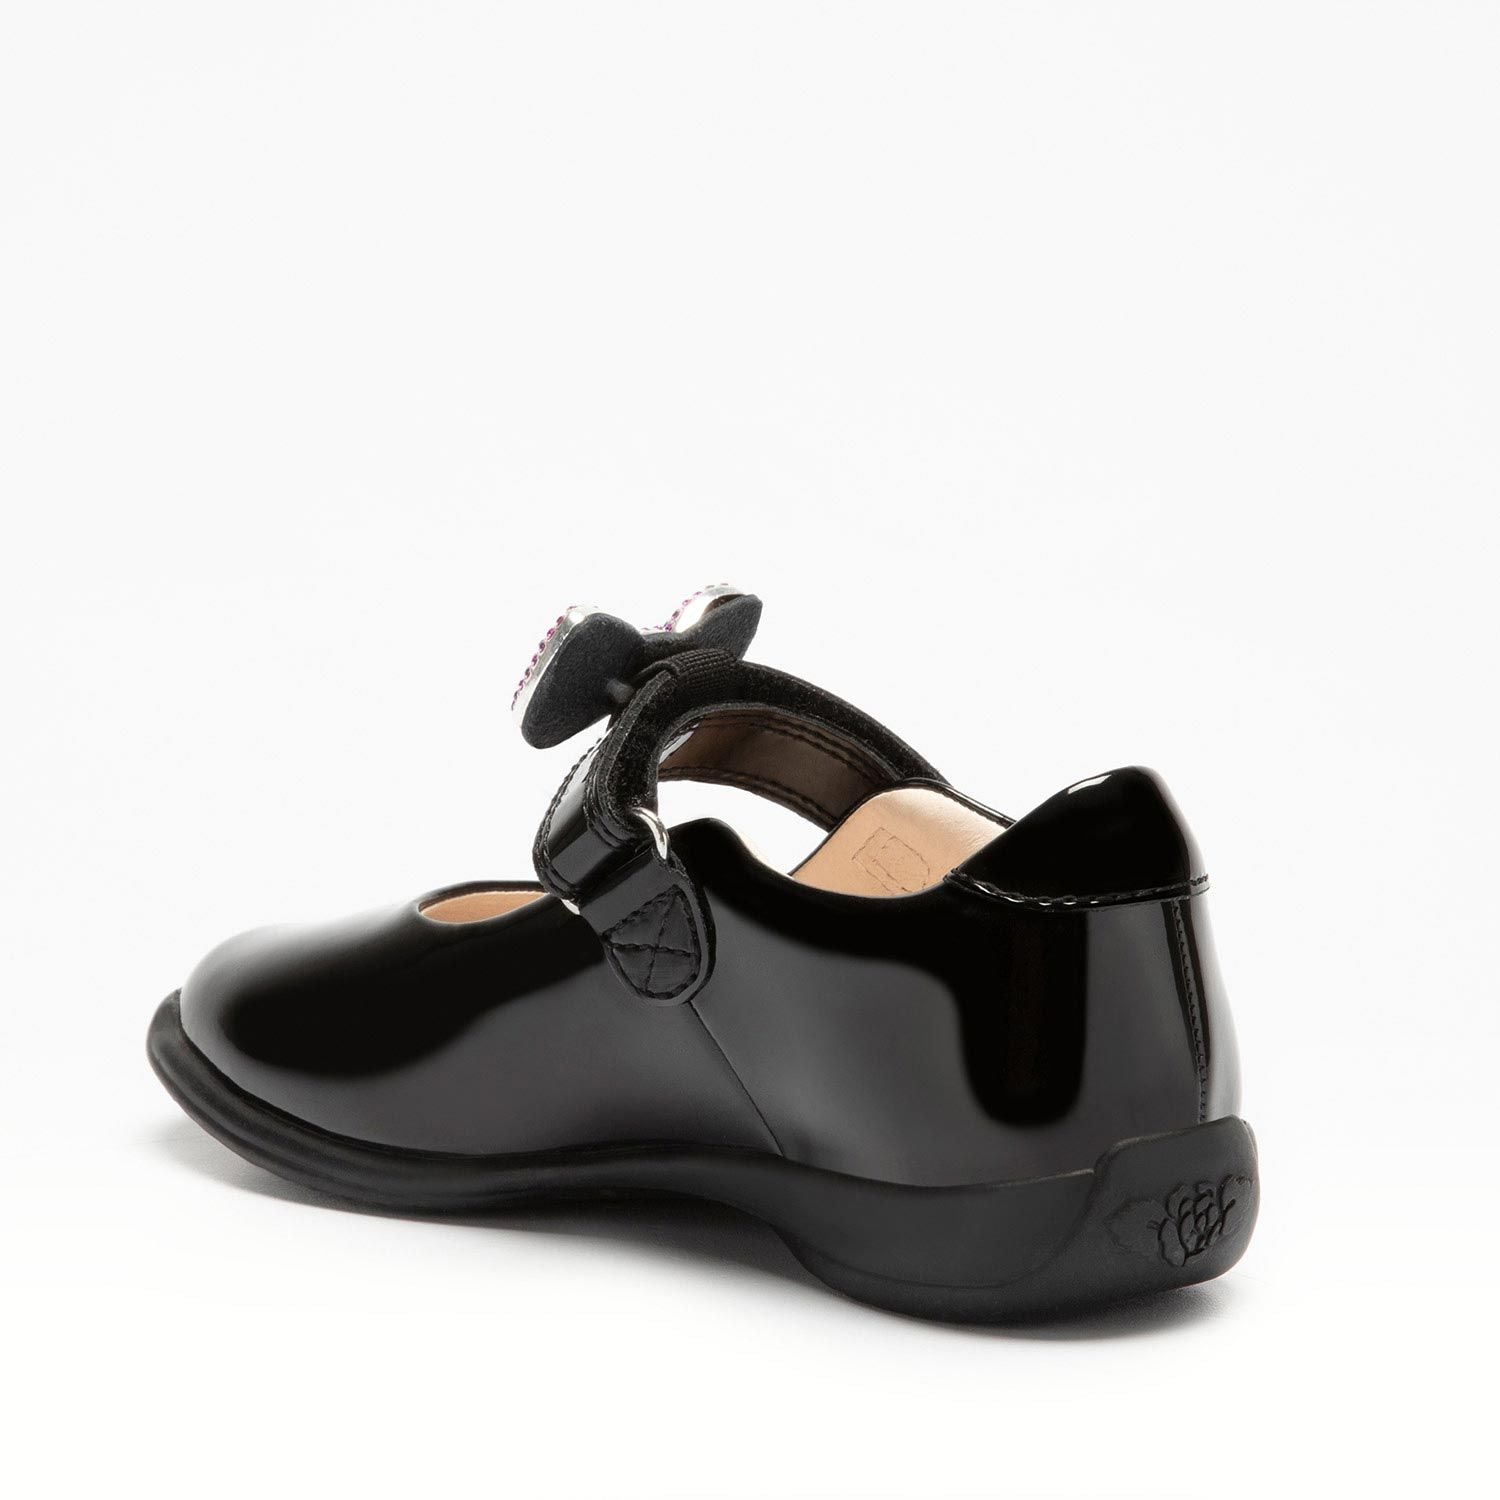 A girls Mary Jane school shoe by Lelli Kelly, style LK8116 Erin, in black patent leather with velcro fastening and detachable multicoloured bow. Angled view.